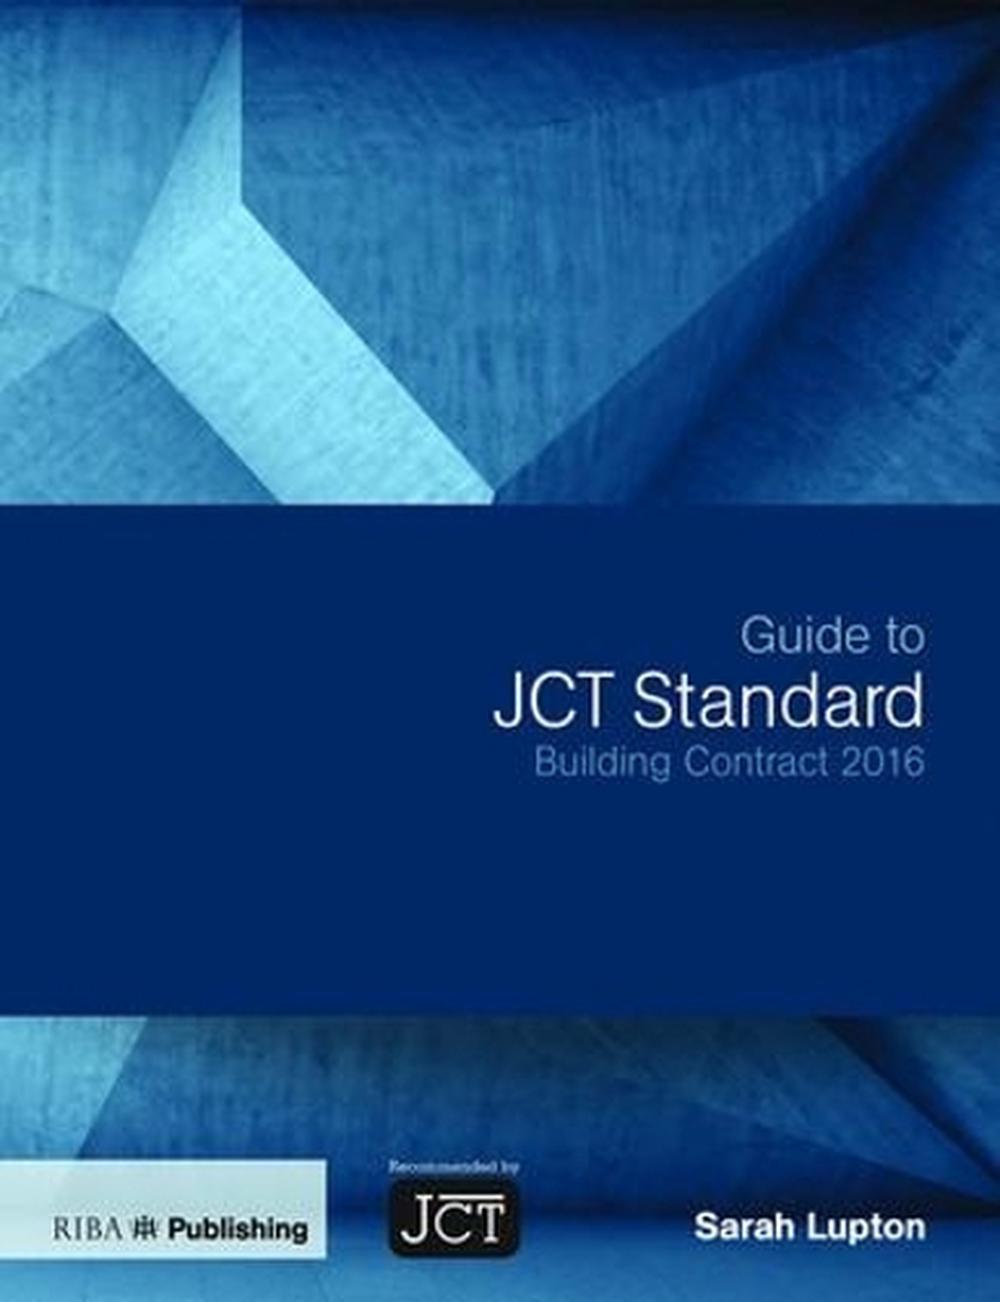 Guide to JCT Standard Building Contract 2016 by Sarah Lupton (English